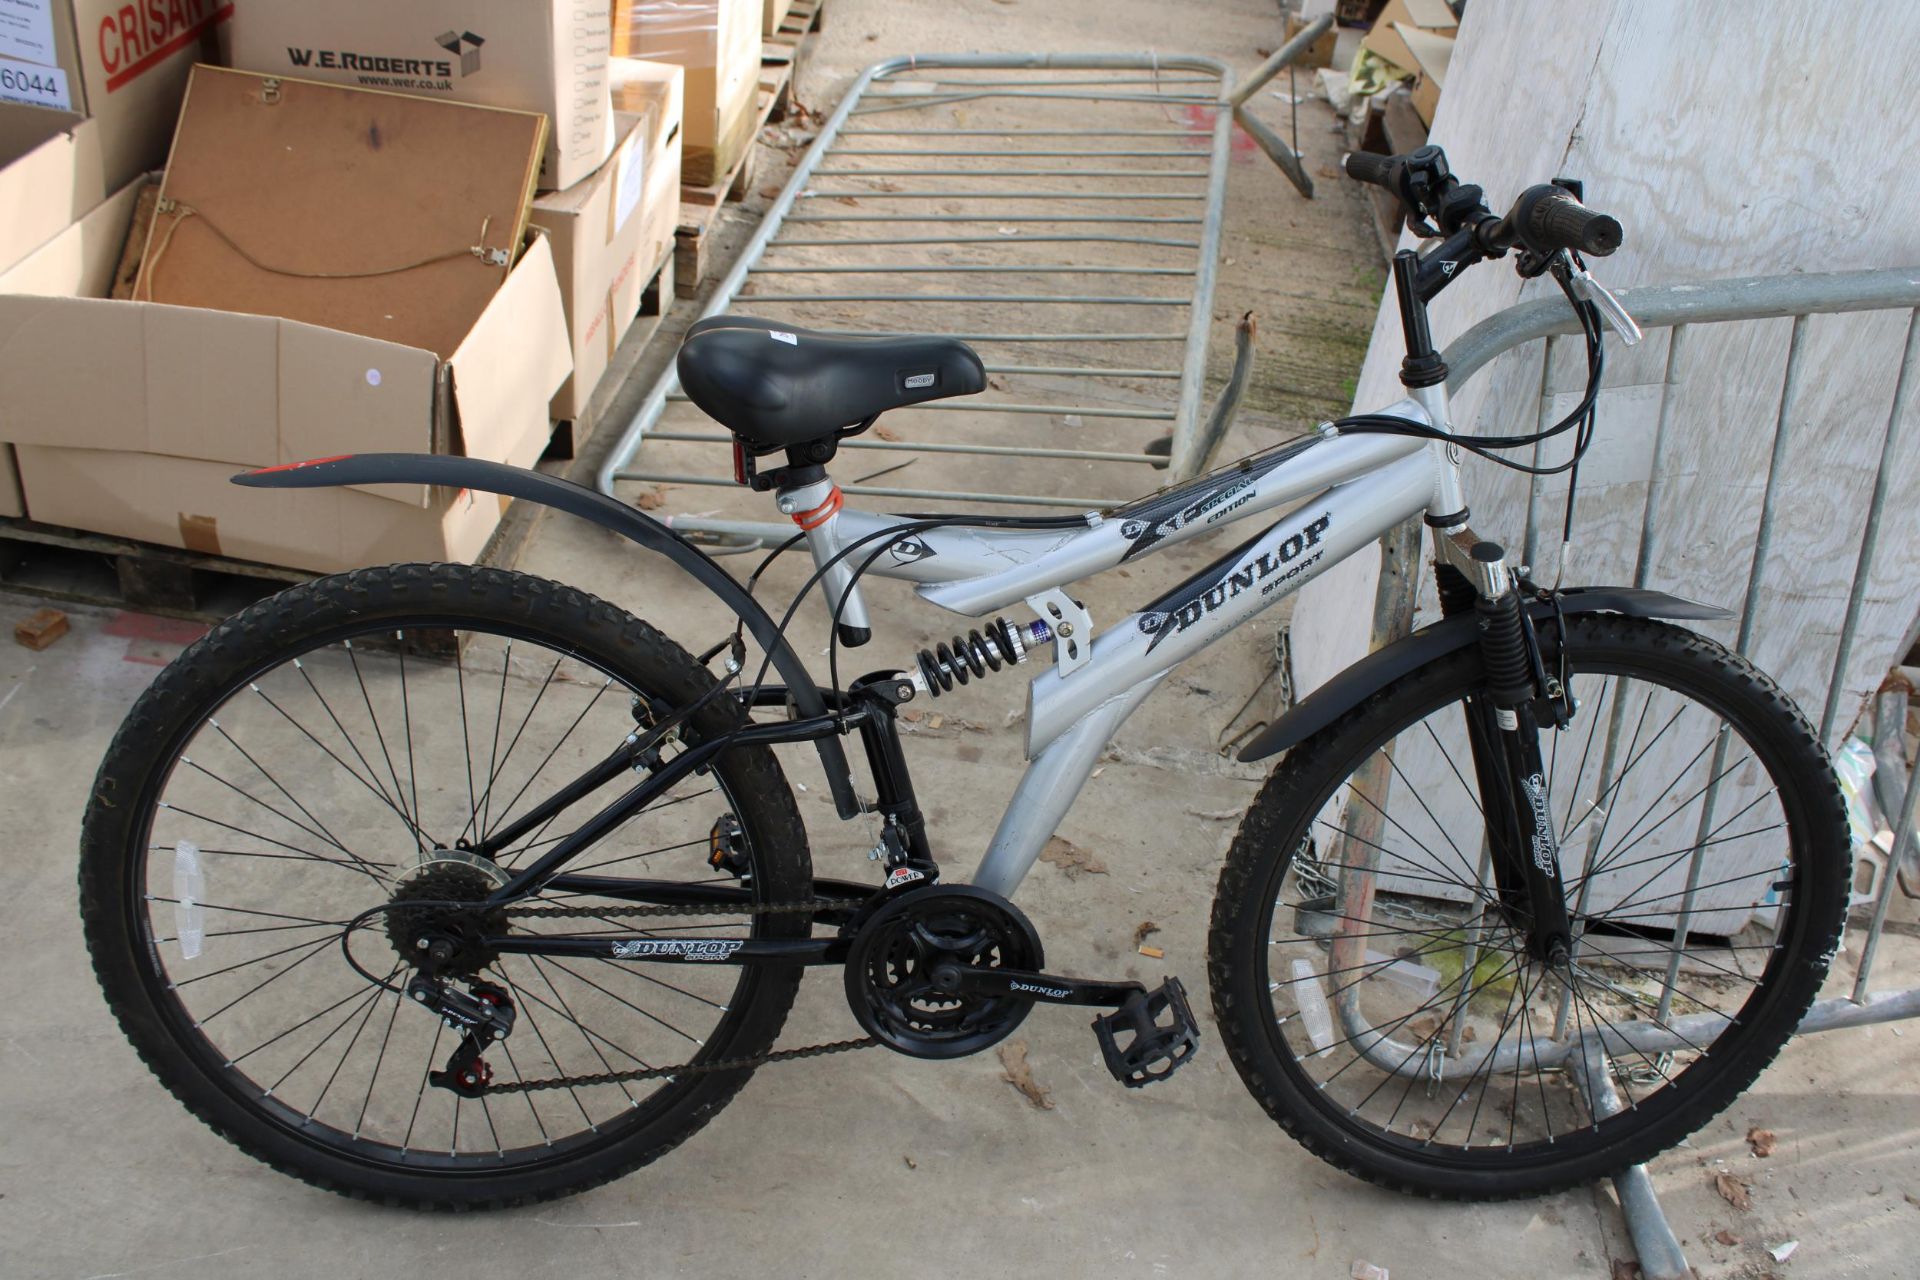 A DUNLOP SPECIAL EDITION MOUNTAIN BIKE WITH FRONT AND REAR SUSPENSION AND 18 SPEED GEAR SYSTEM